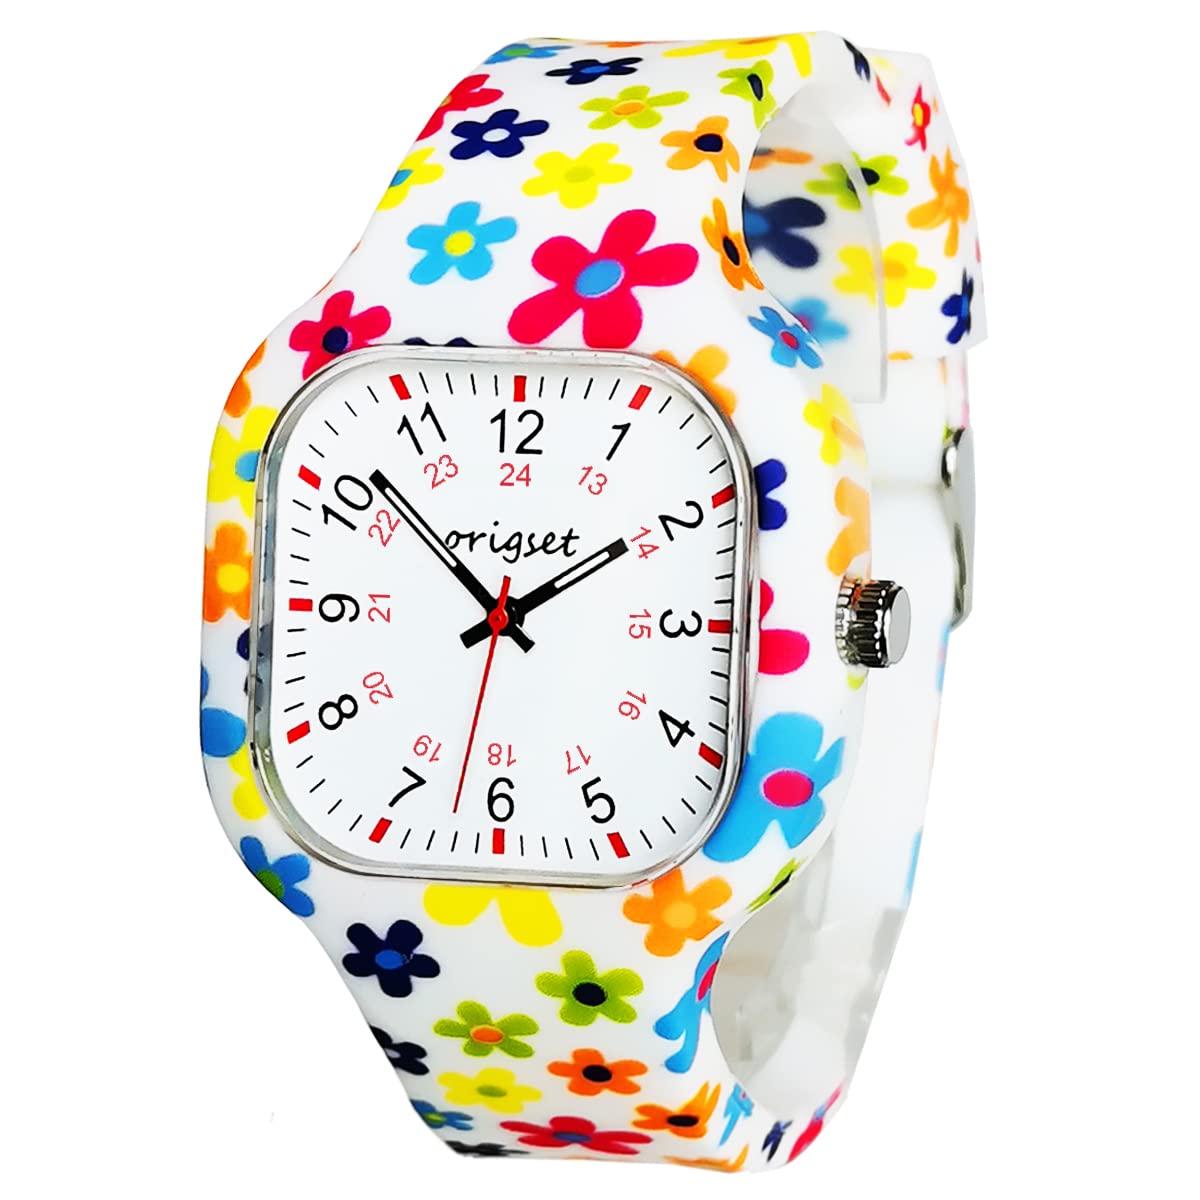 origset Women Watch Square 24 Hour 3-Hand Easy to Read Time for Nurse Medical Students Teachers Doctors Colorful Water Proof